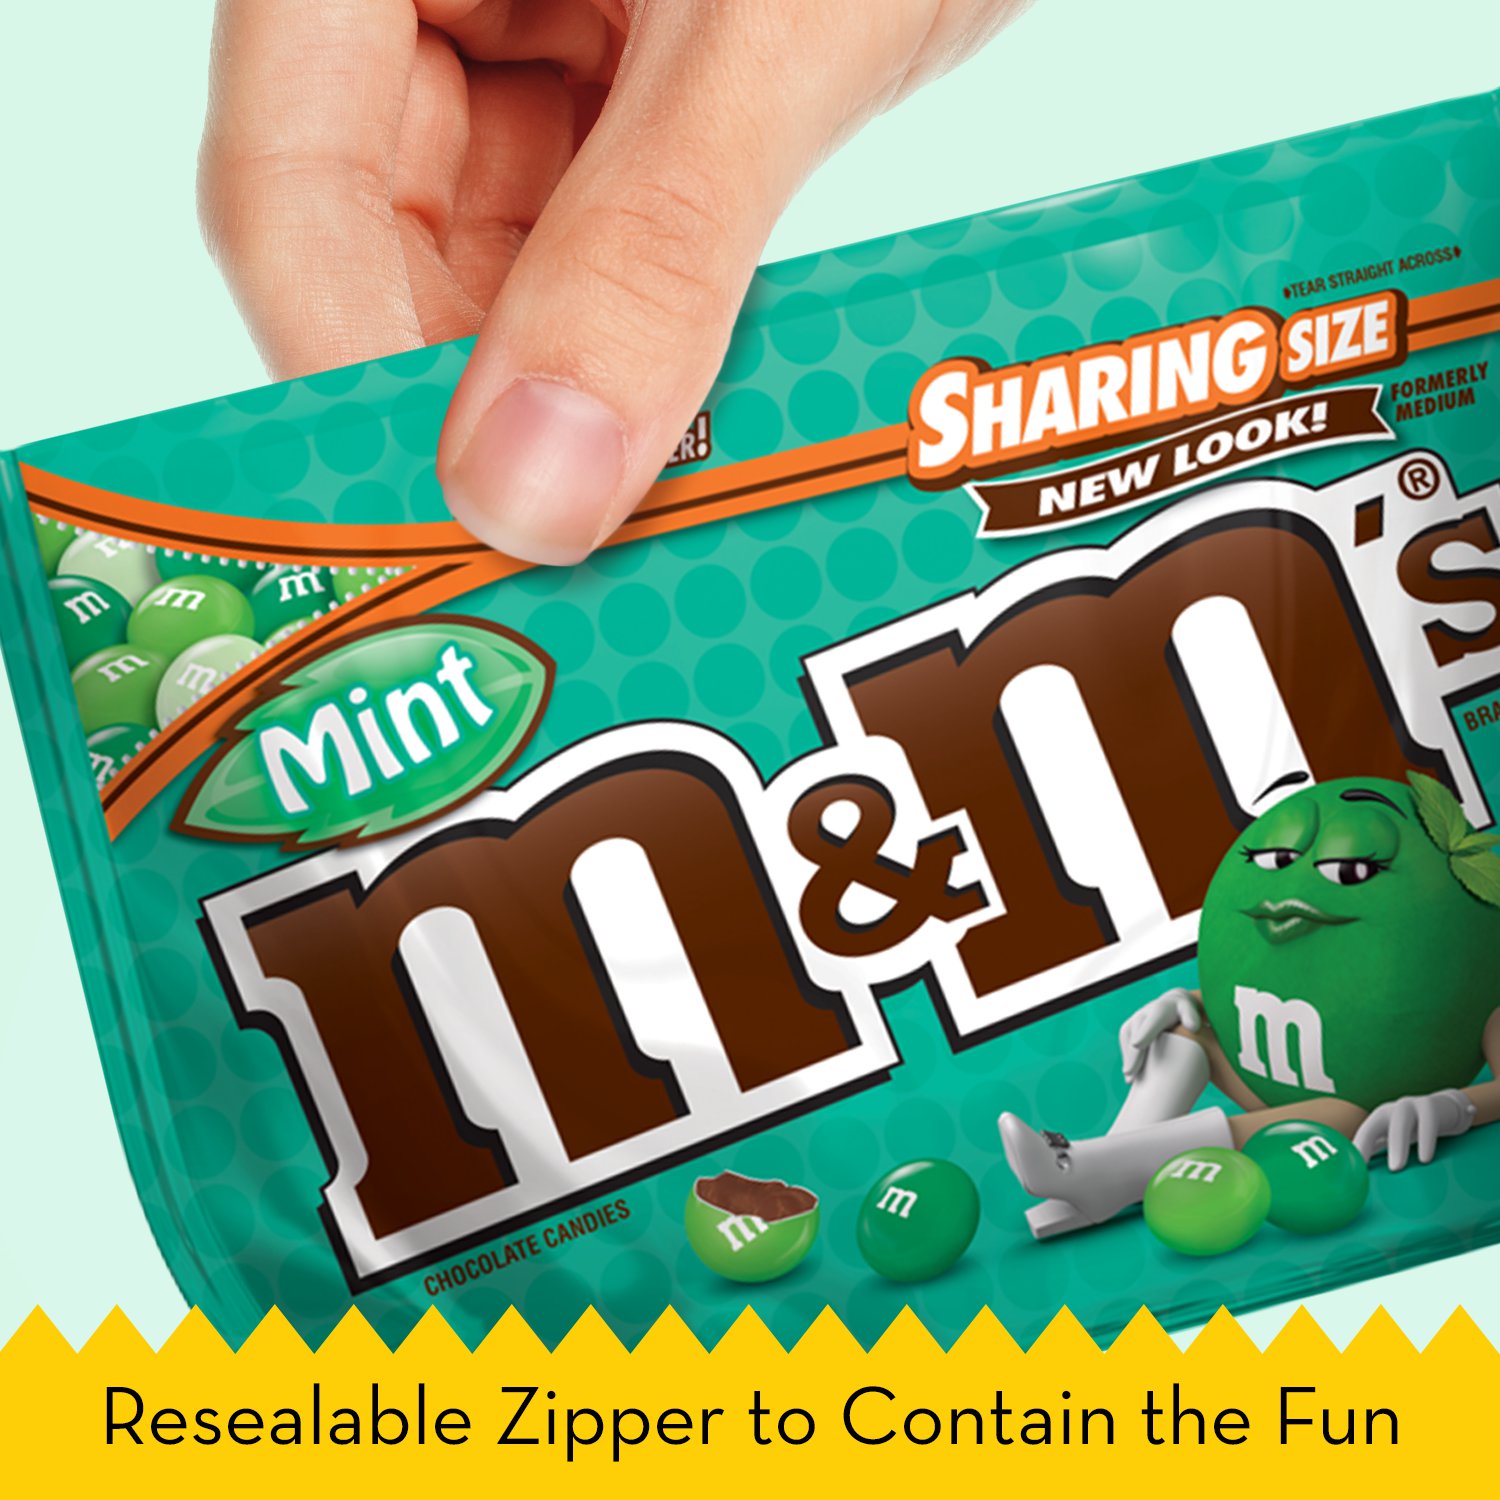 M&M's Dark Chocolate Mint Candy, Sharing Size - 9.6 oz Bag - image 4 of 7